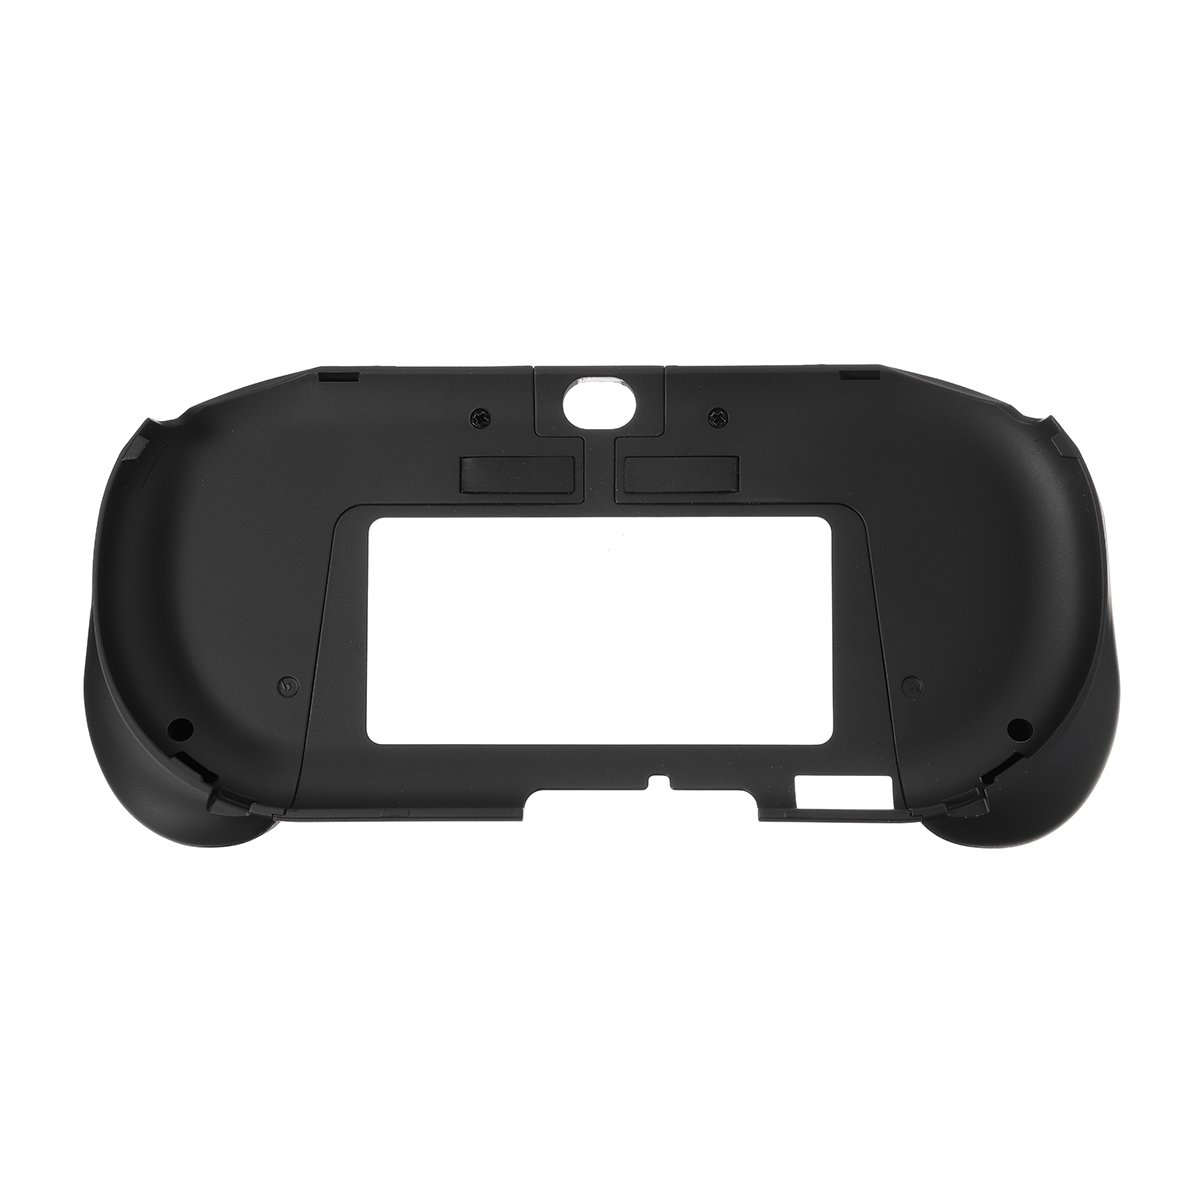 L2 R2 Trigger Grips Handle Shell Protective Case For Sony PlayStation PS Vita 2000 Game Console